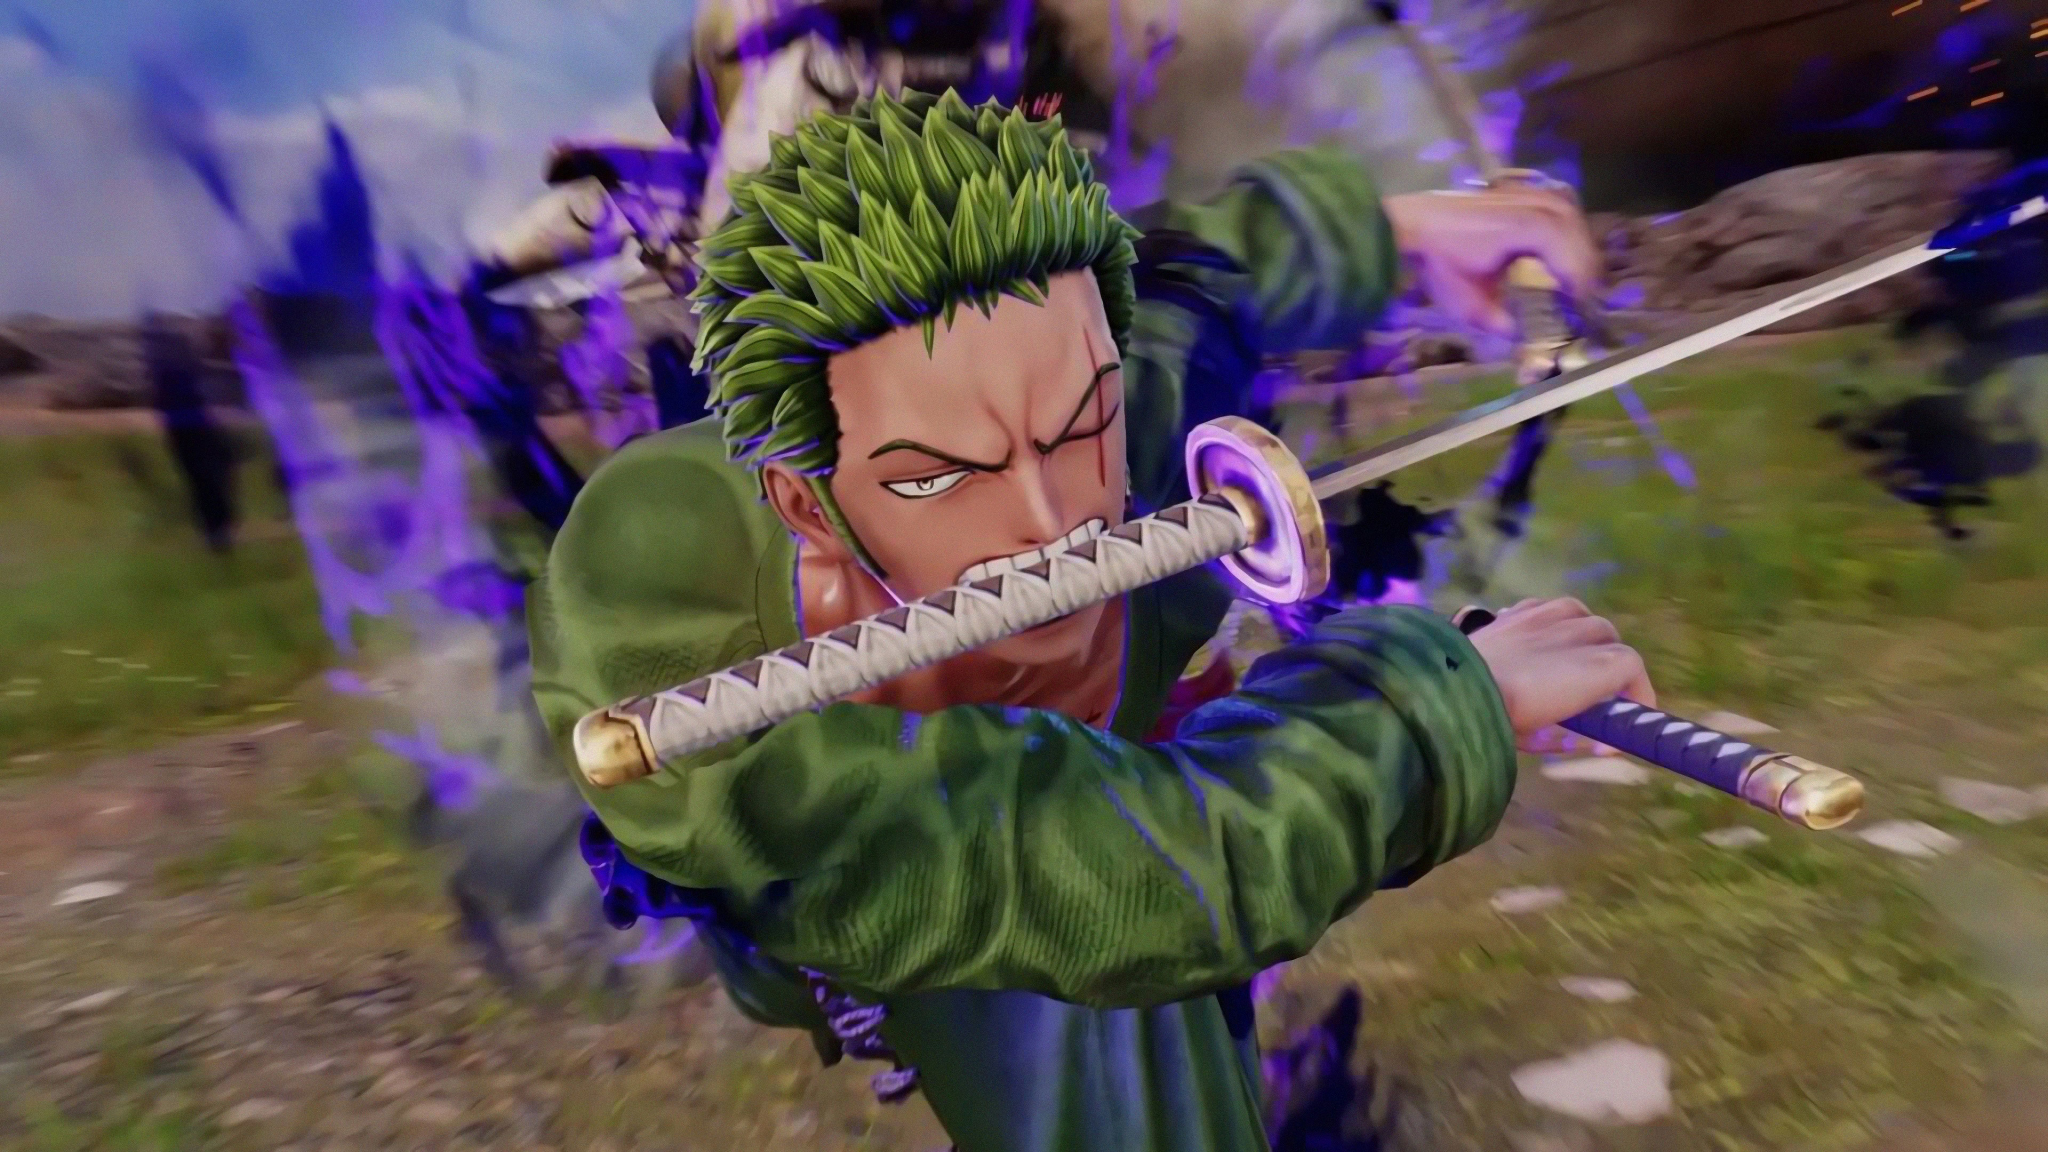 Download Jump Force Roronoa Zoro Video Game One Piece Anime 48x1152 Wallpaper Dual Wide 48x1152 Hd Image Background